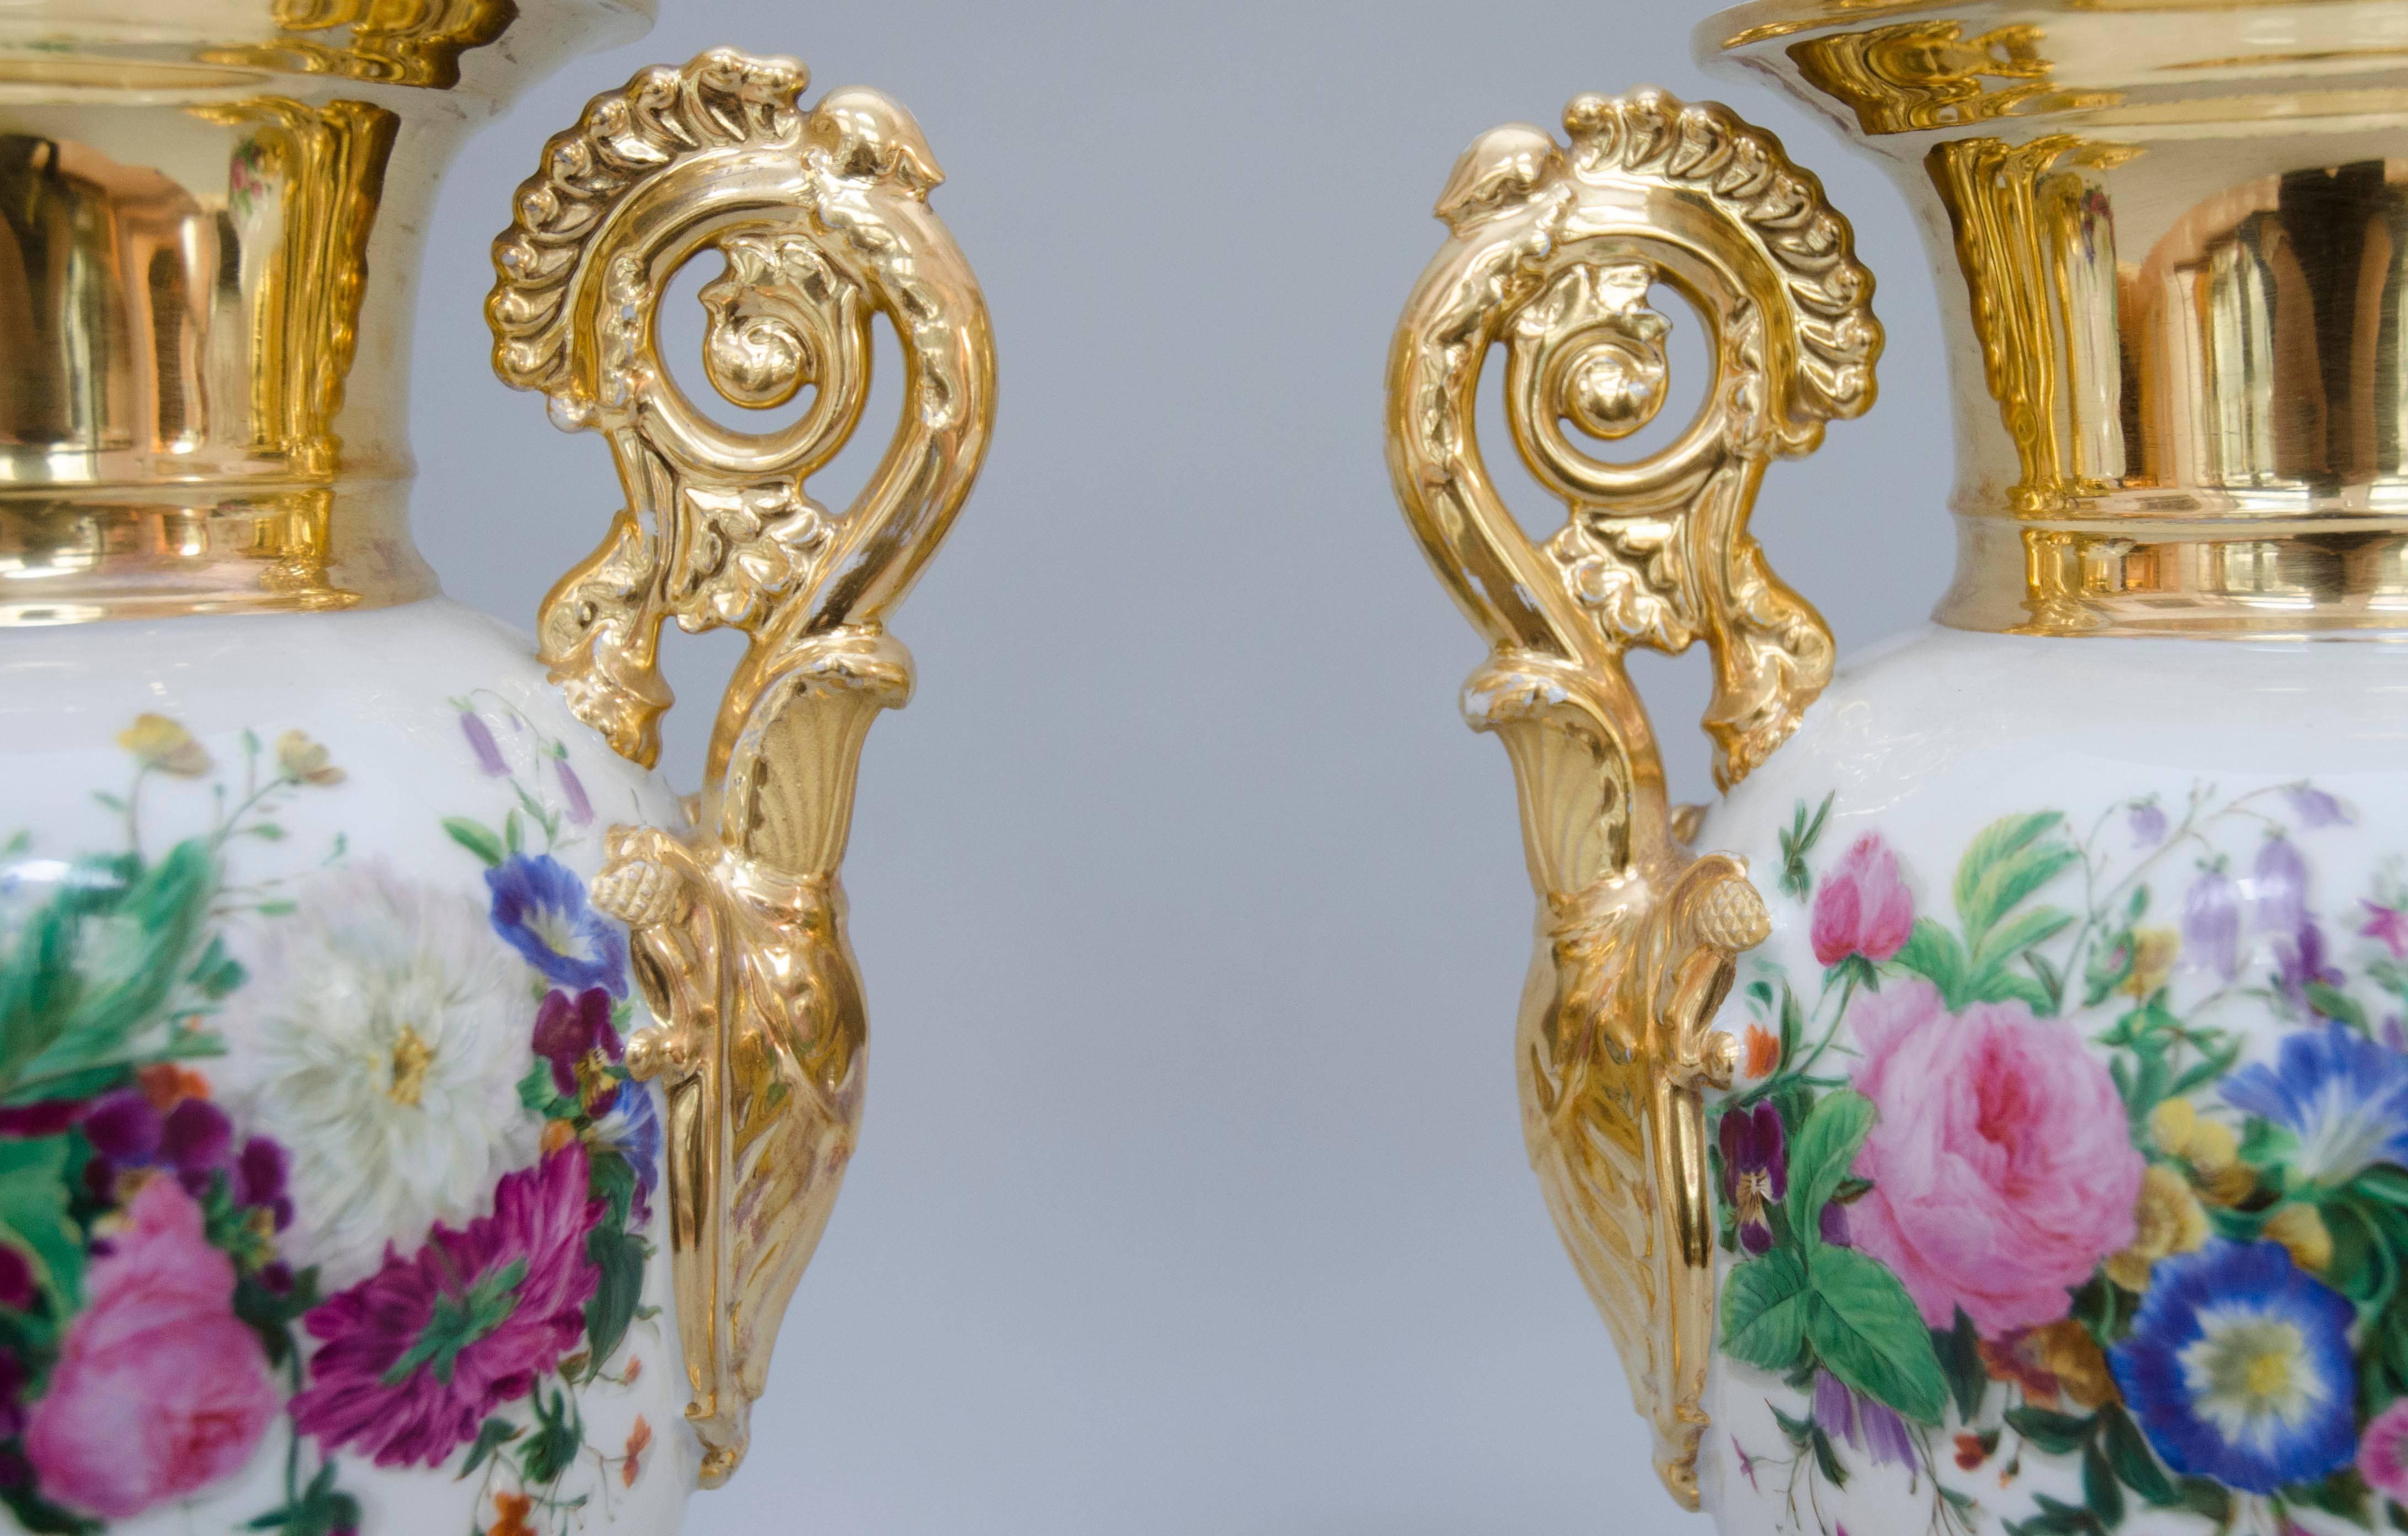 Rococo Revival Mid-19th Century Large Pair of Egg Shaped Vases with Garlands of Flowers, Paris For Sale